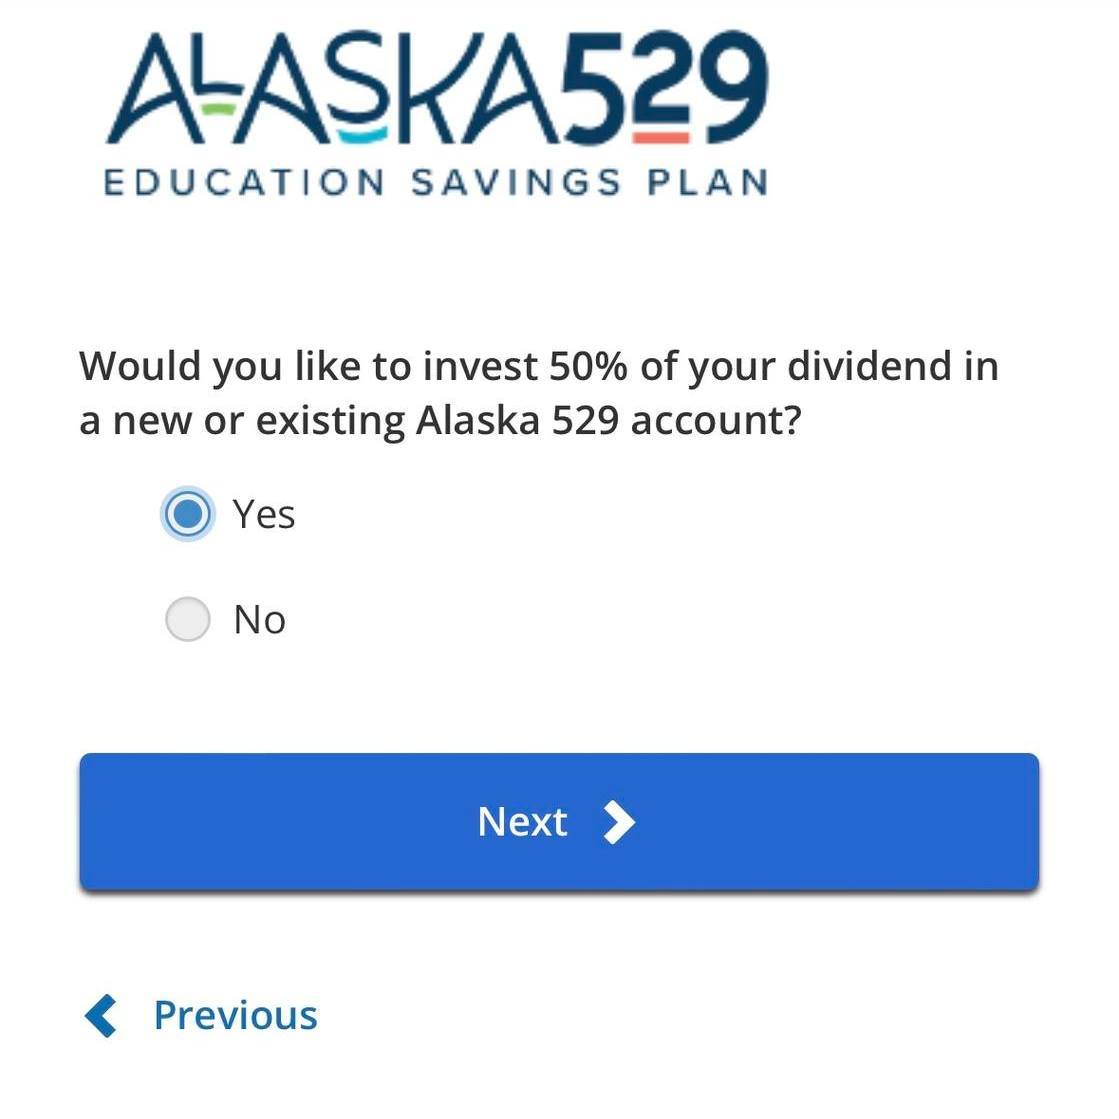 Did you check yes to investing 50% of your Alaska PFD into an Alaska 529 account?